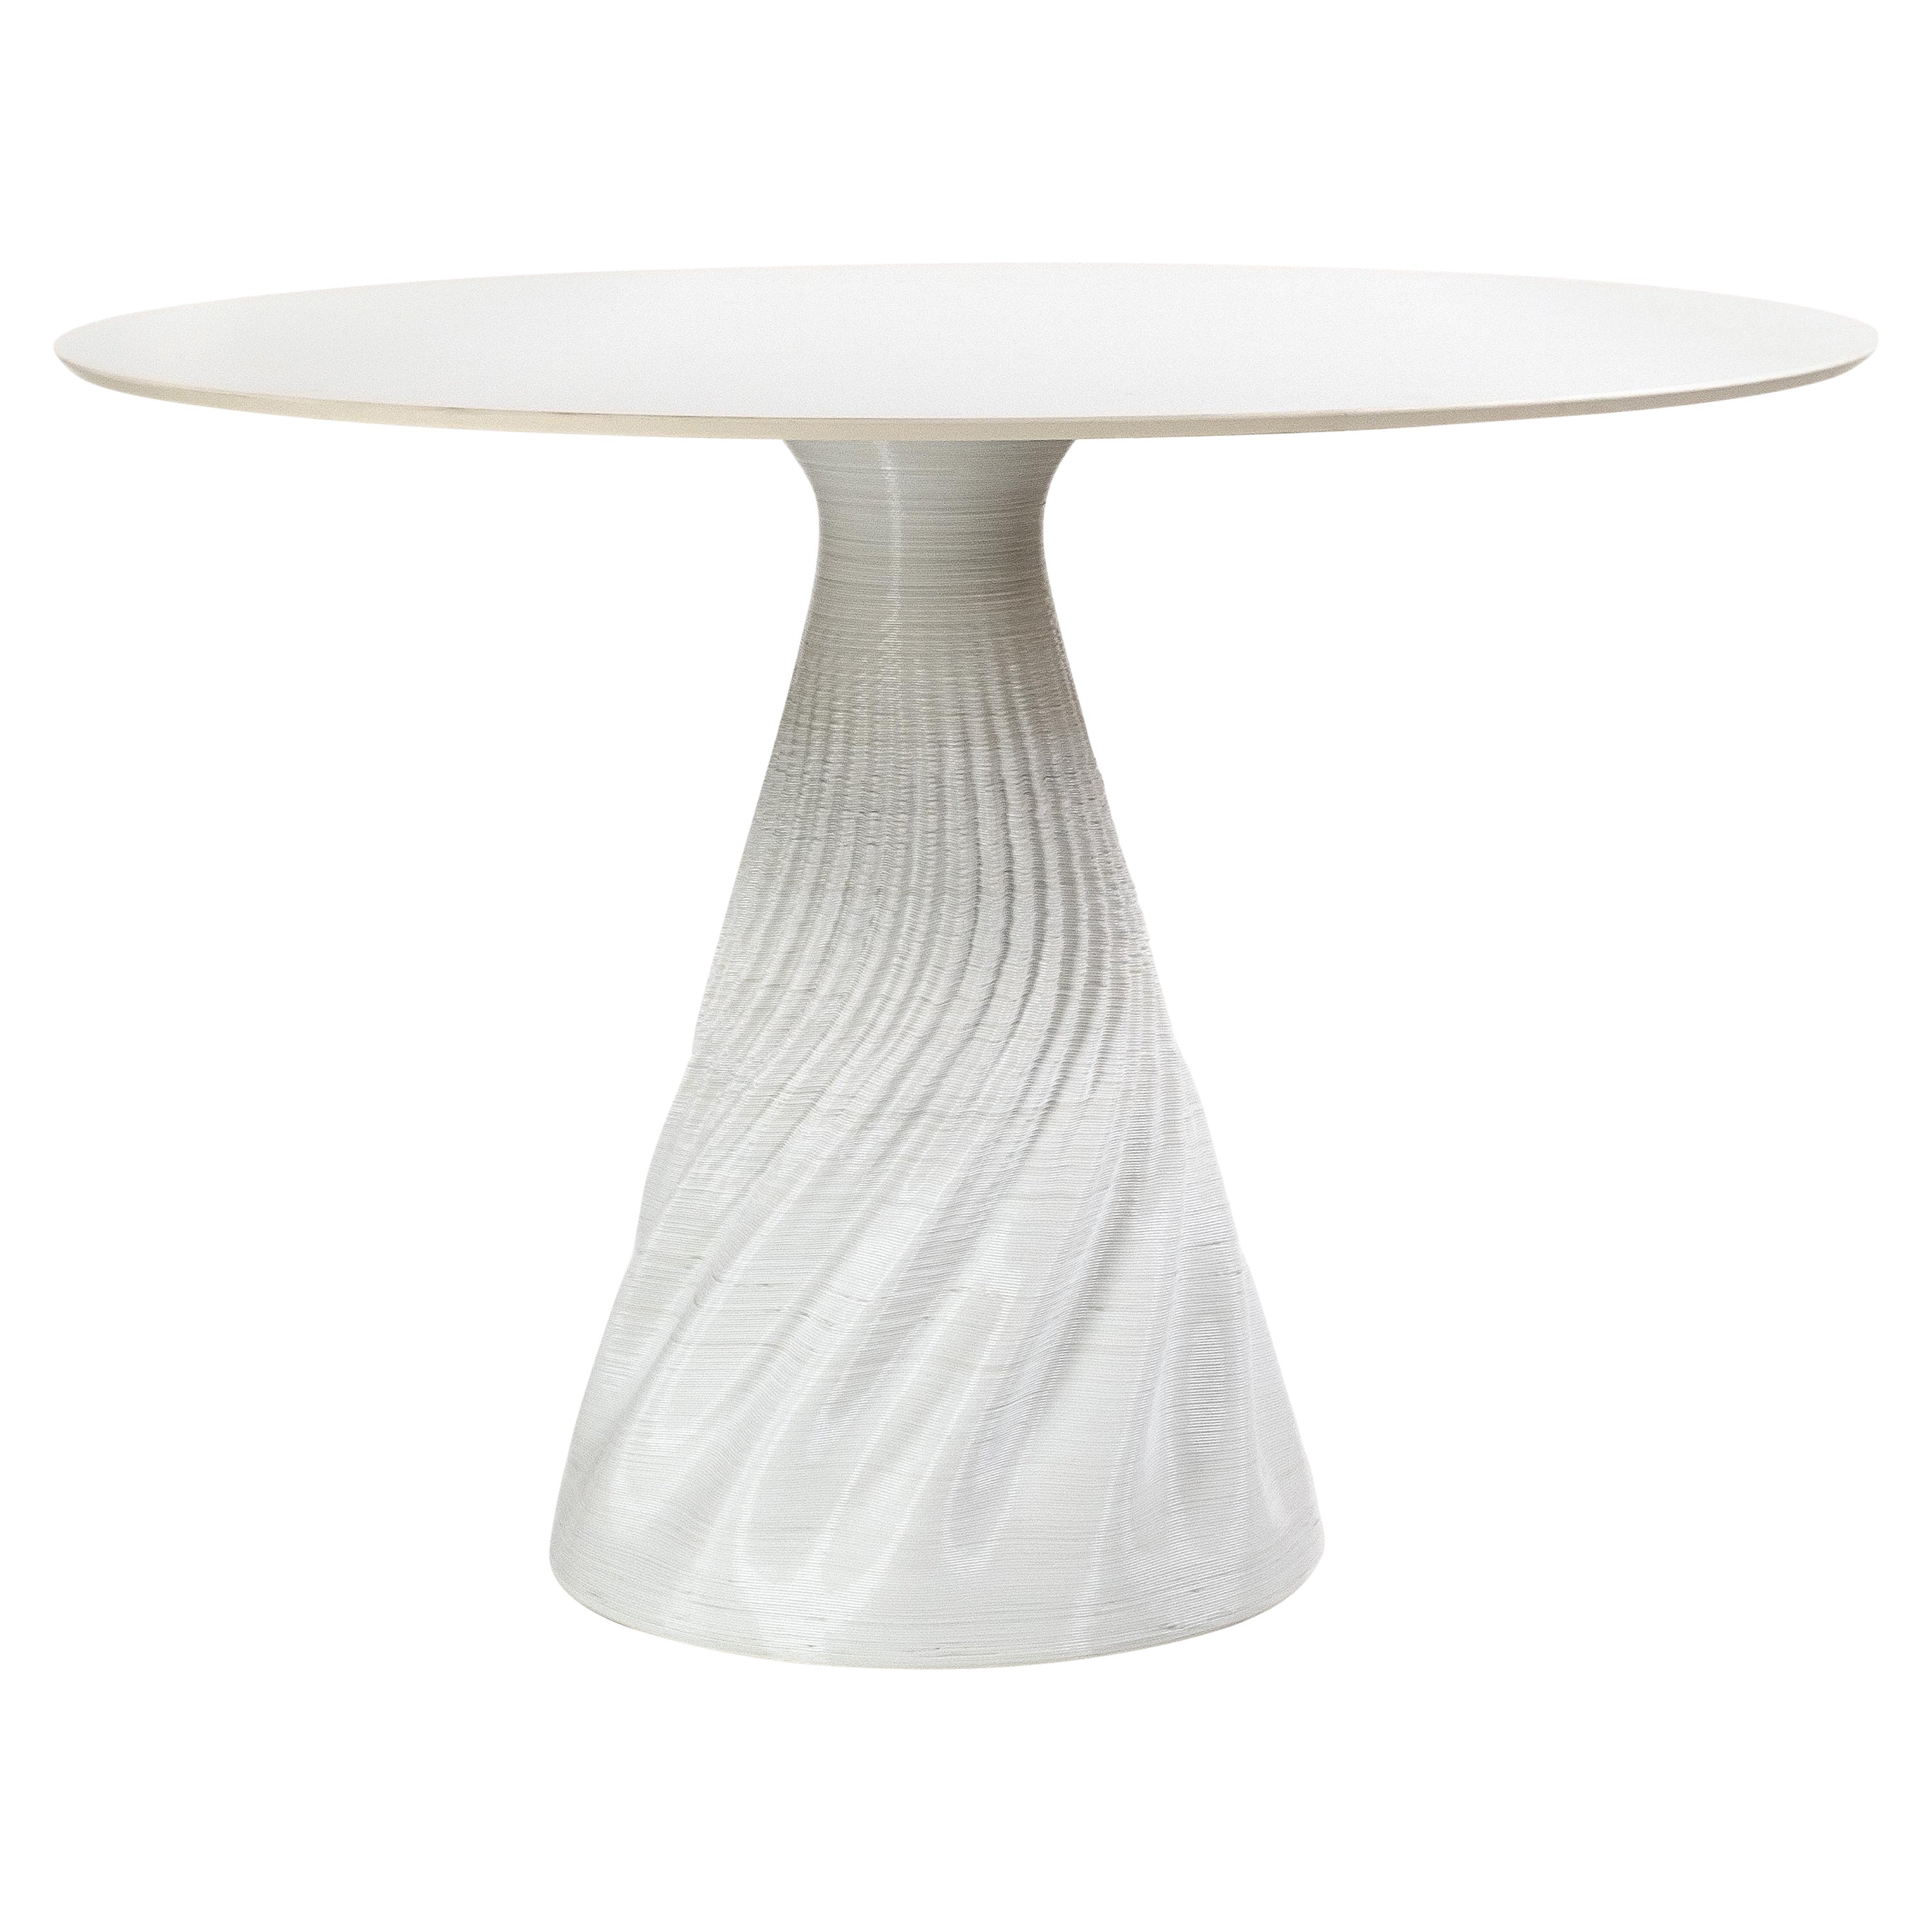 Contemporary White Dining Table, Additive Manufacturing in Biopolymers, Italy